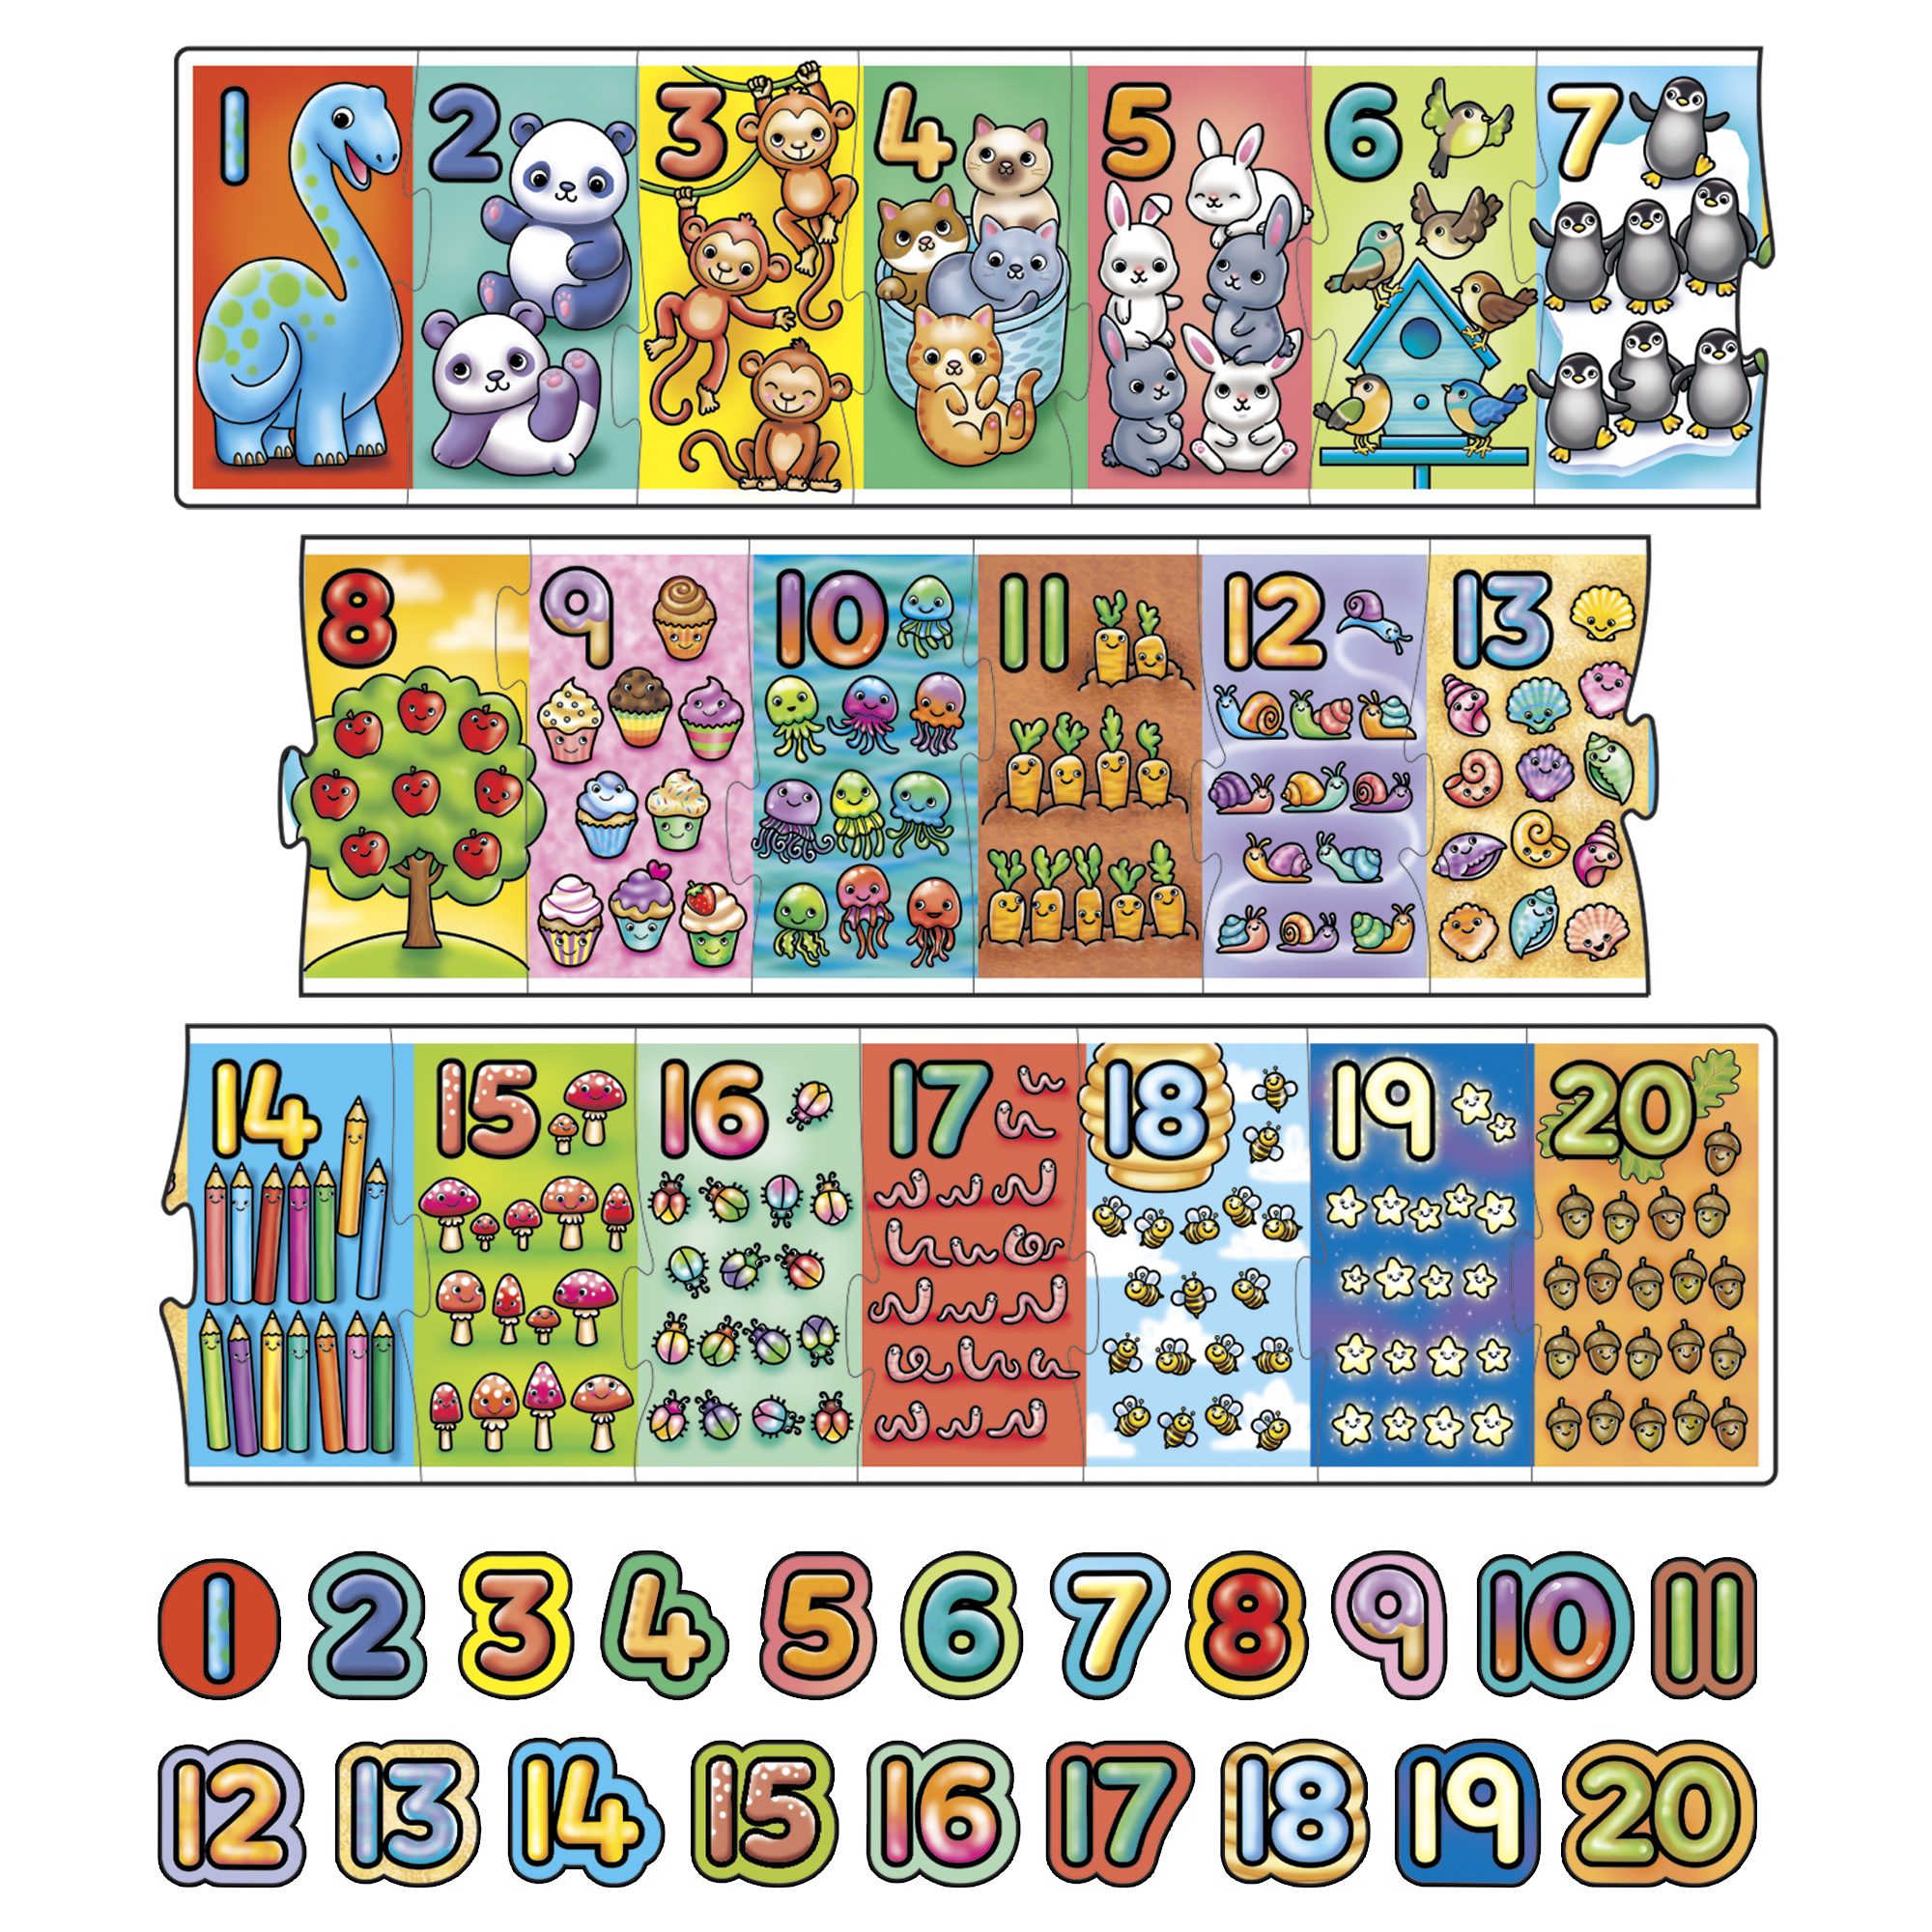 306 Giant Number_PUZZLE_WEB